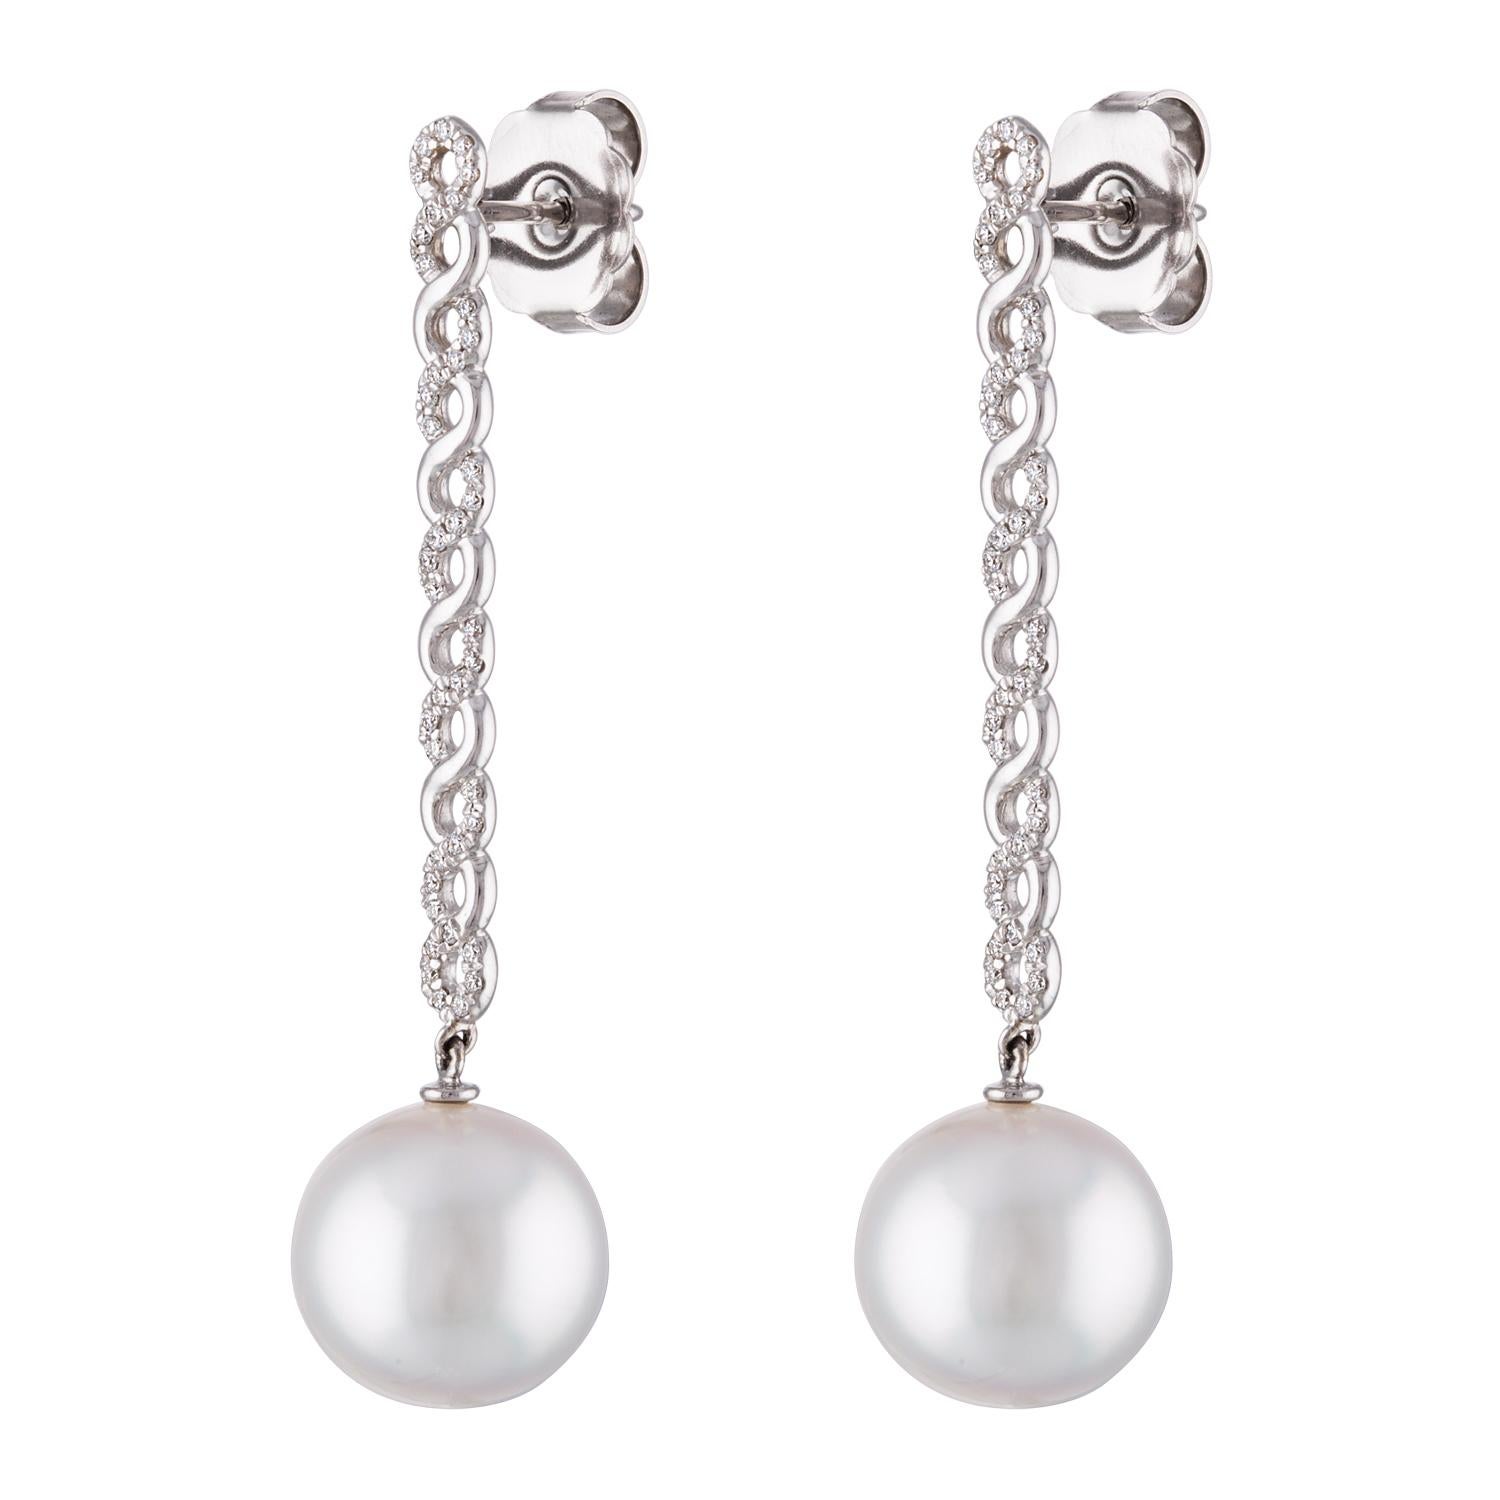 These earrings feature fine quality South Sea white round cultured pearls measuring 12.6mm. The pearls are dangling from 14 karat white gold and diamonds. The earrings have a total of 0.32 carats of diamonds.
This statement piece is great for a